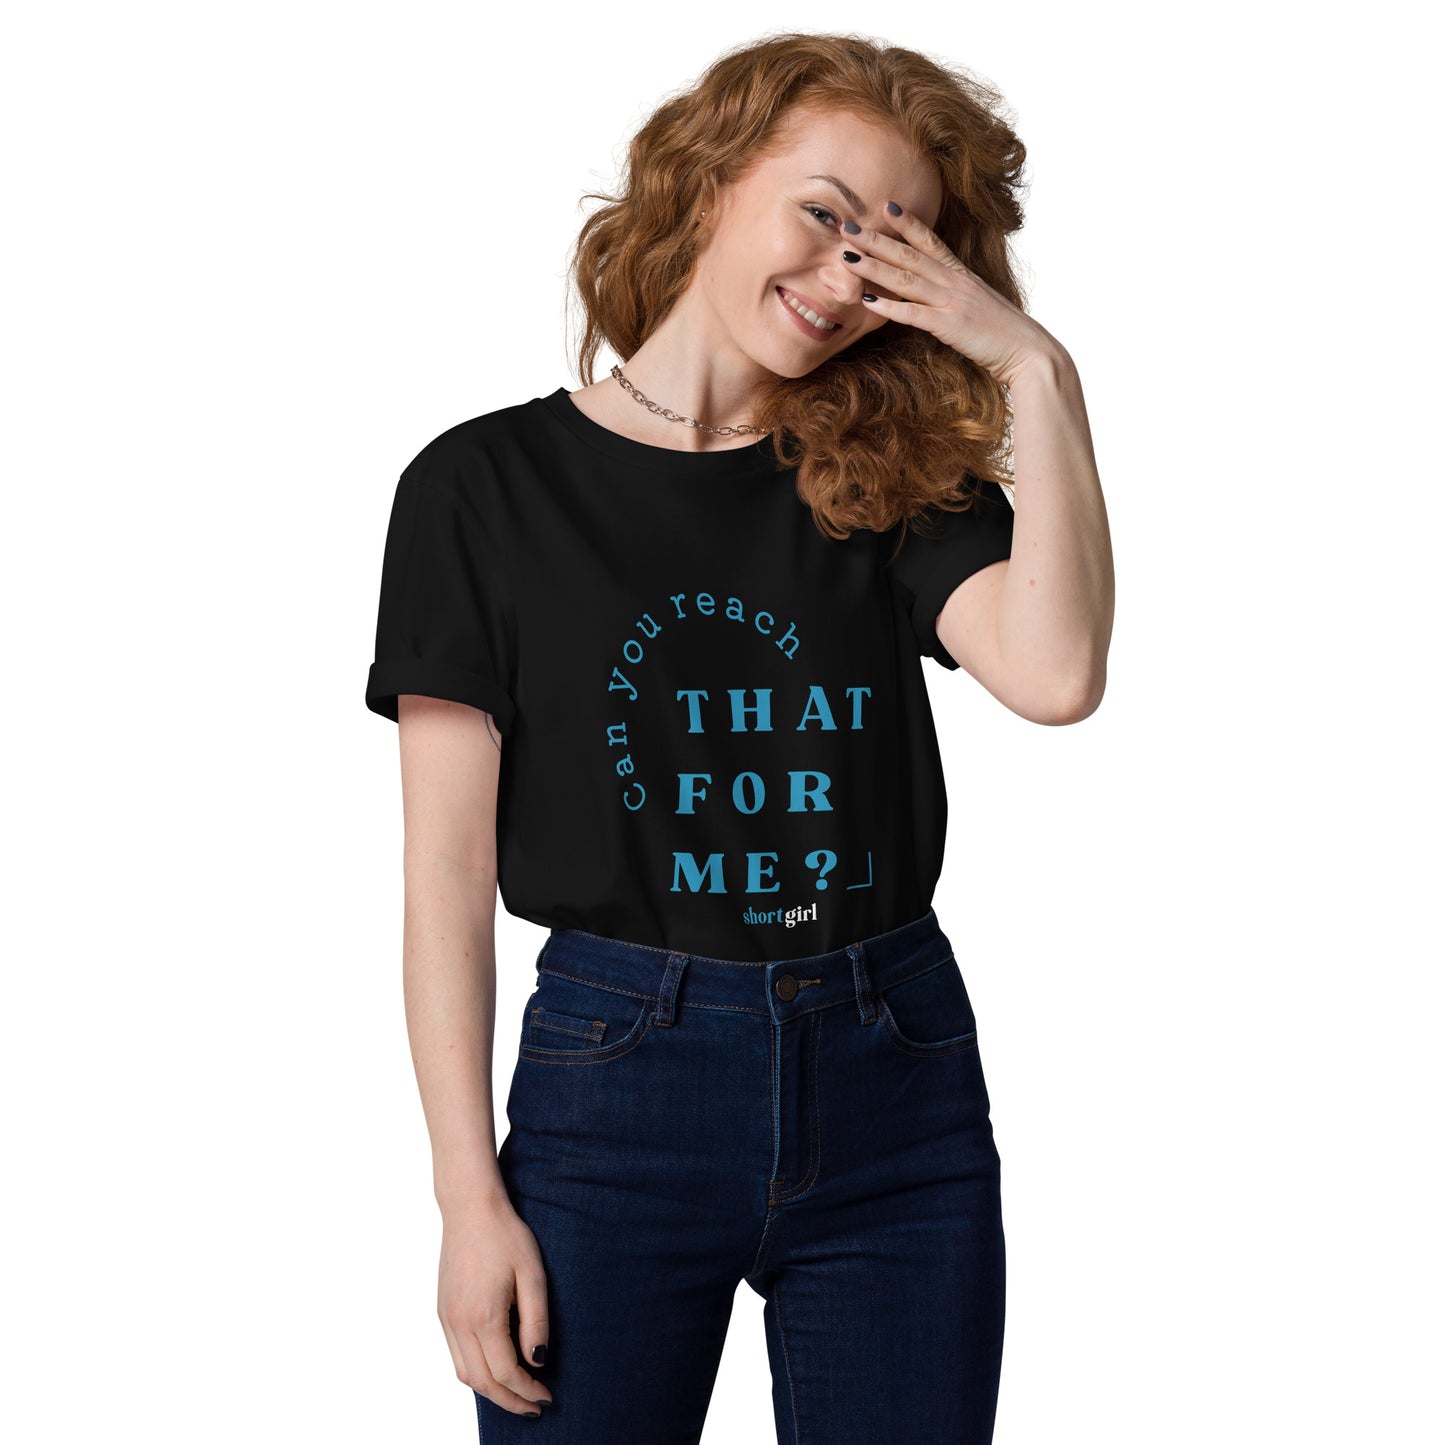 Unisex organic cotton t-shirt - Can you reach that for me